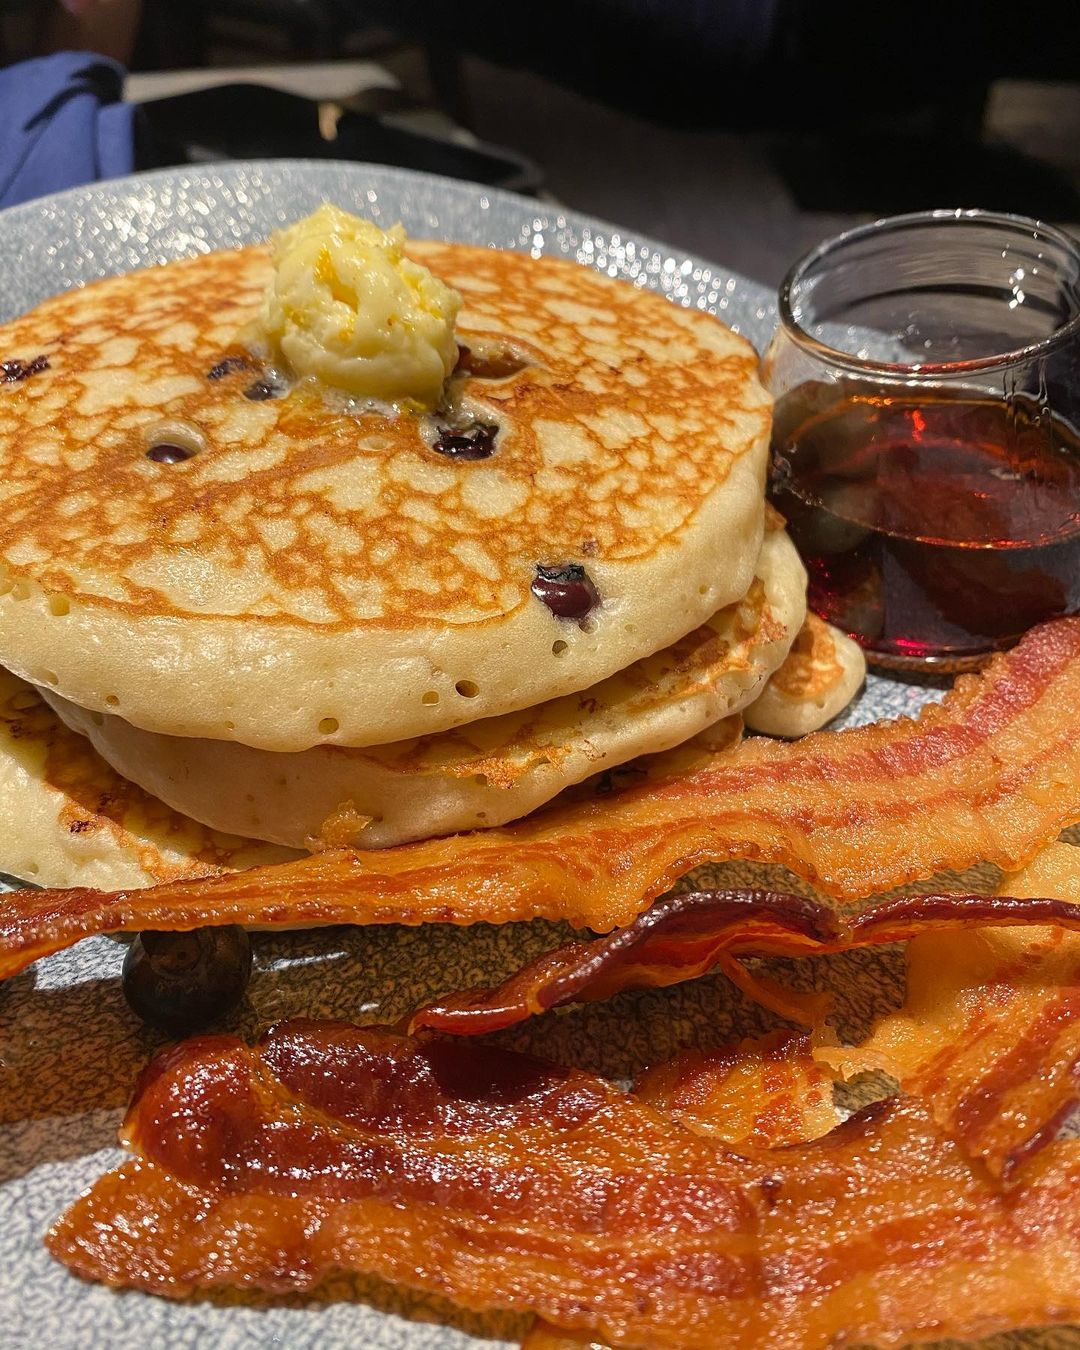 Breakfast at Ale & Compass - Best of Disney World